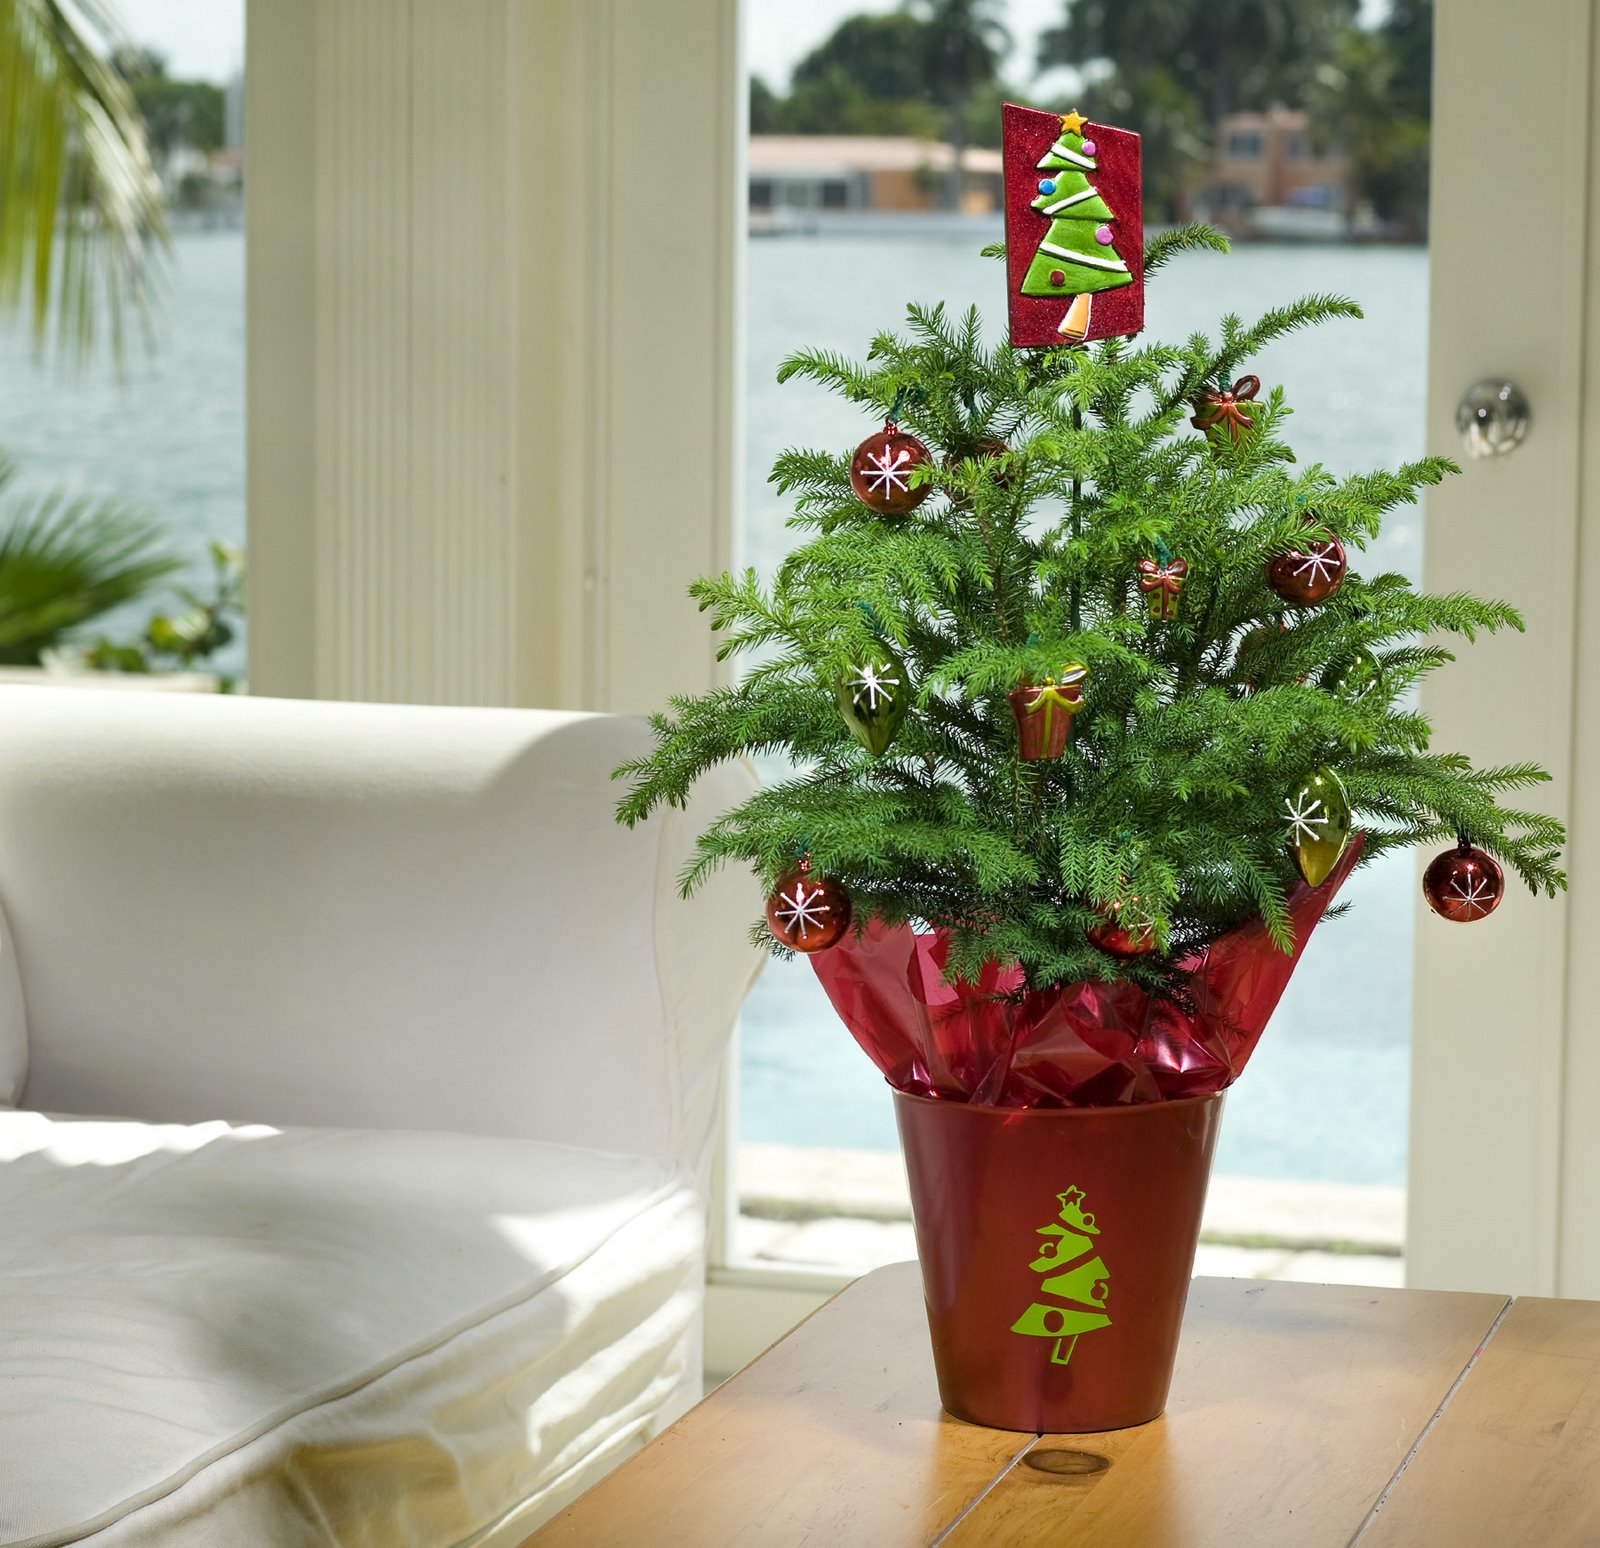 [Norfolk+Island+Pines+give+-green-+a+new+meaning+in+holiday+decorating.JPG]